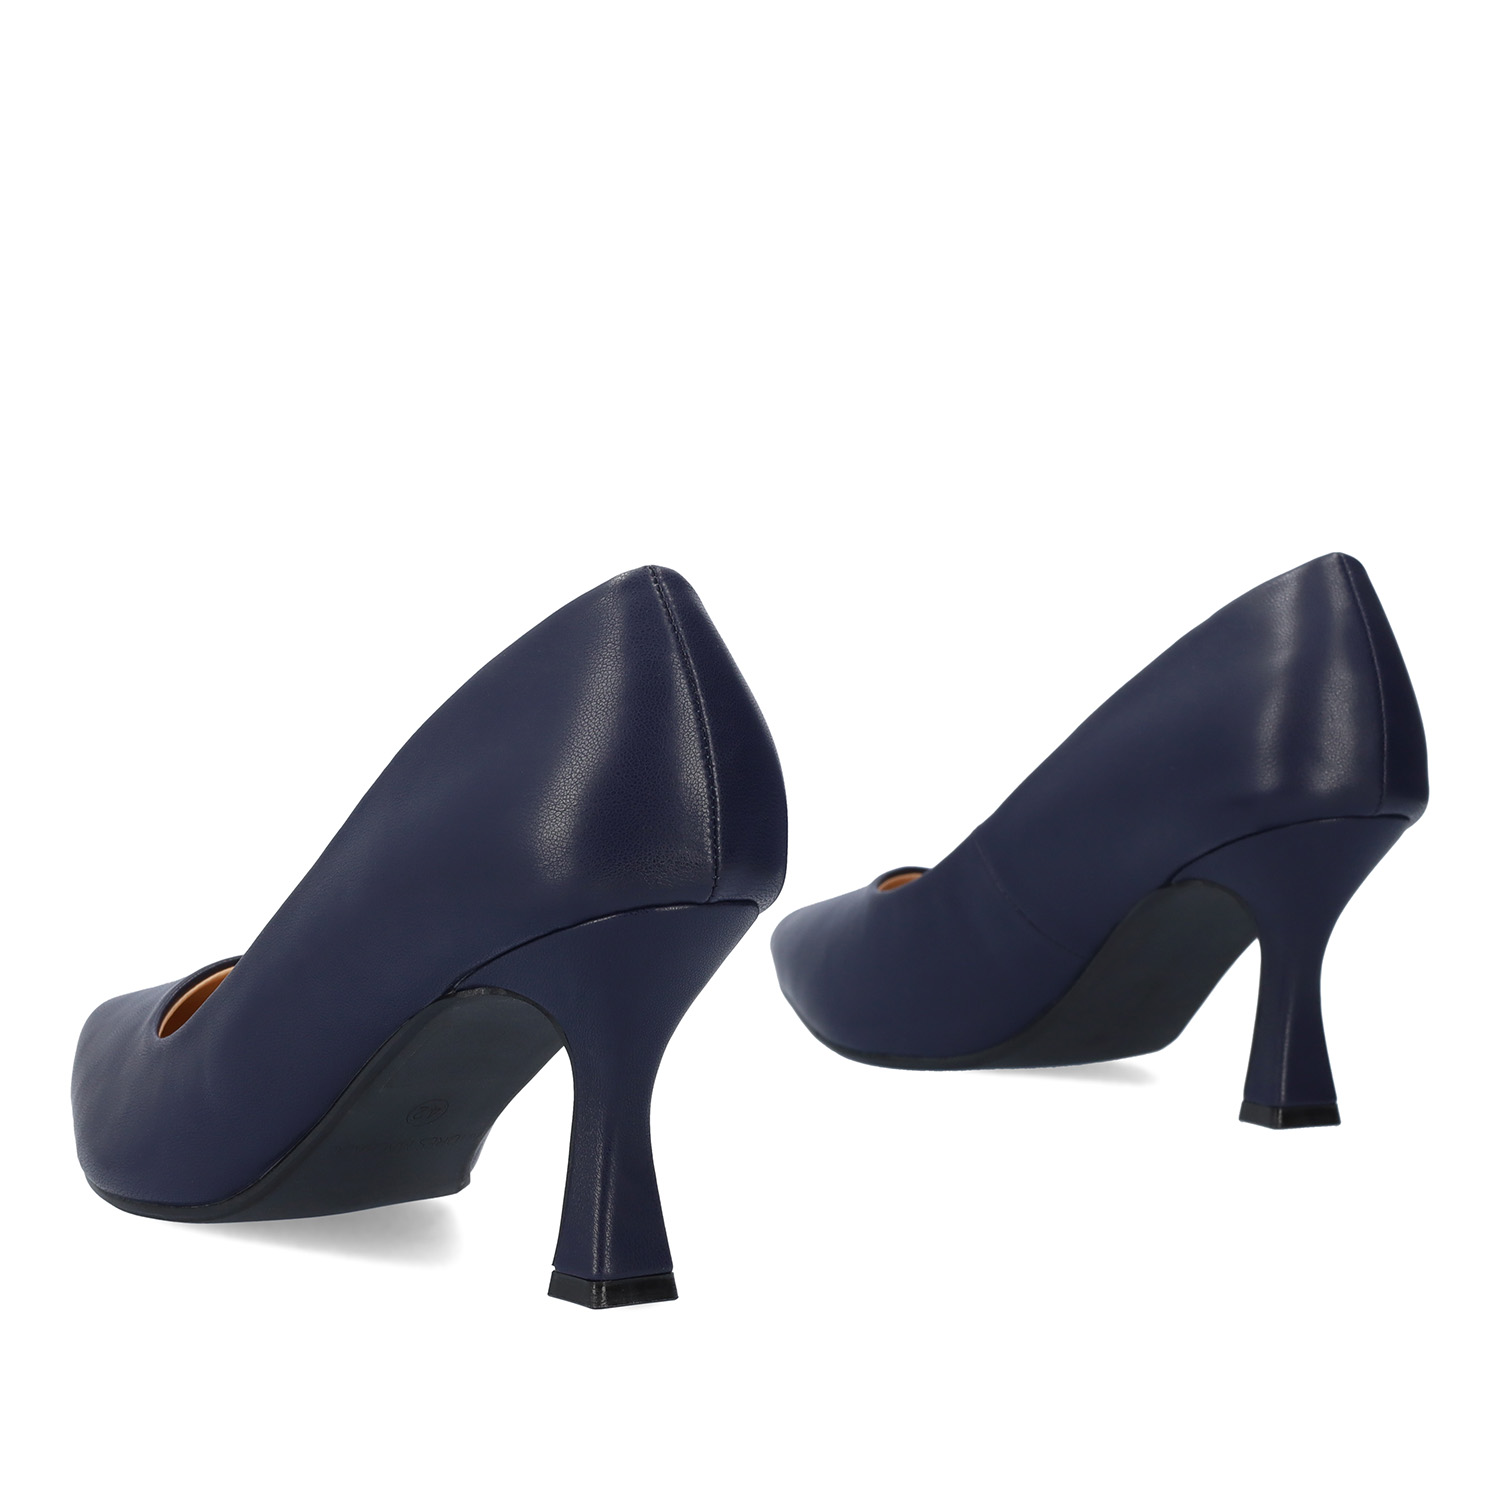 Heeled shoes in navy faux leather 